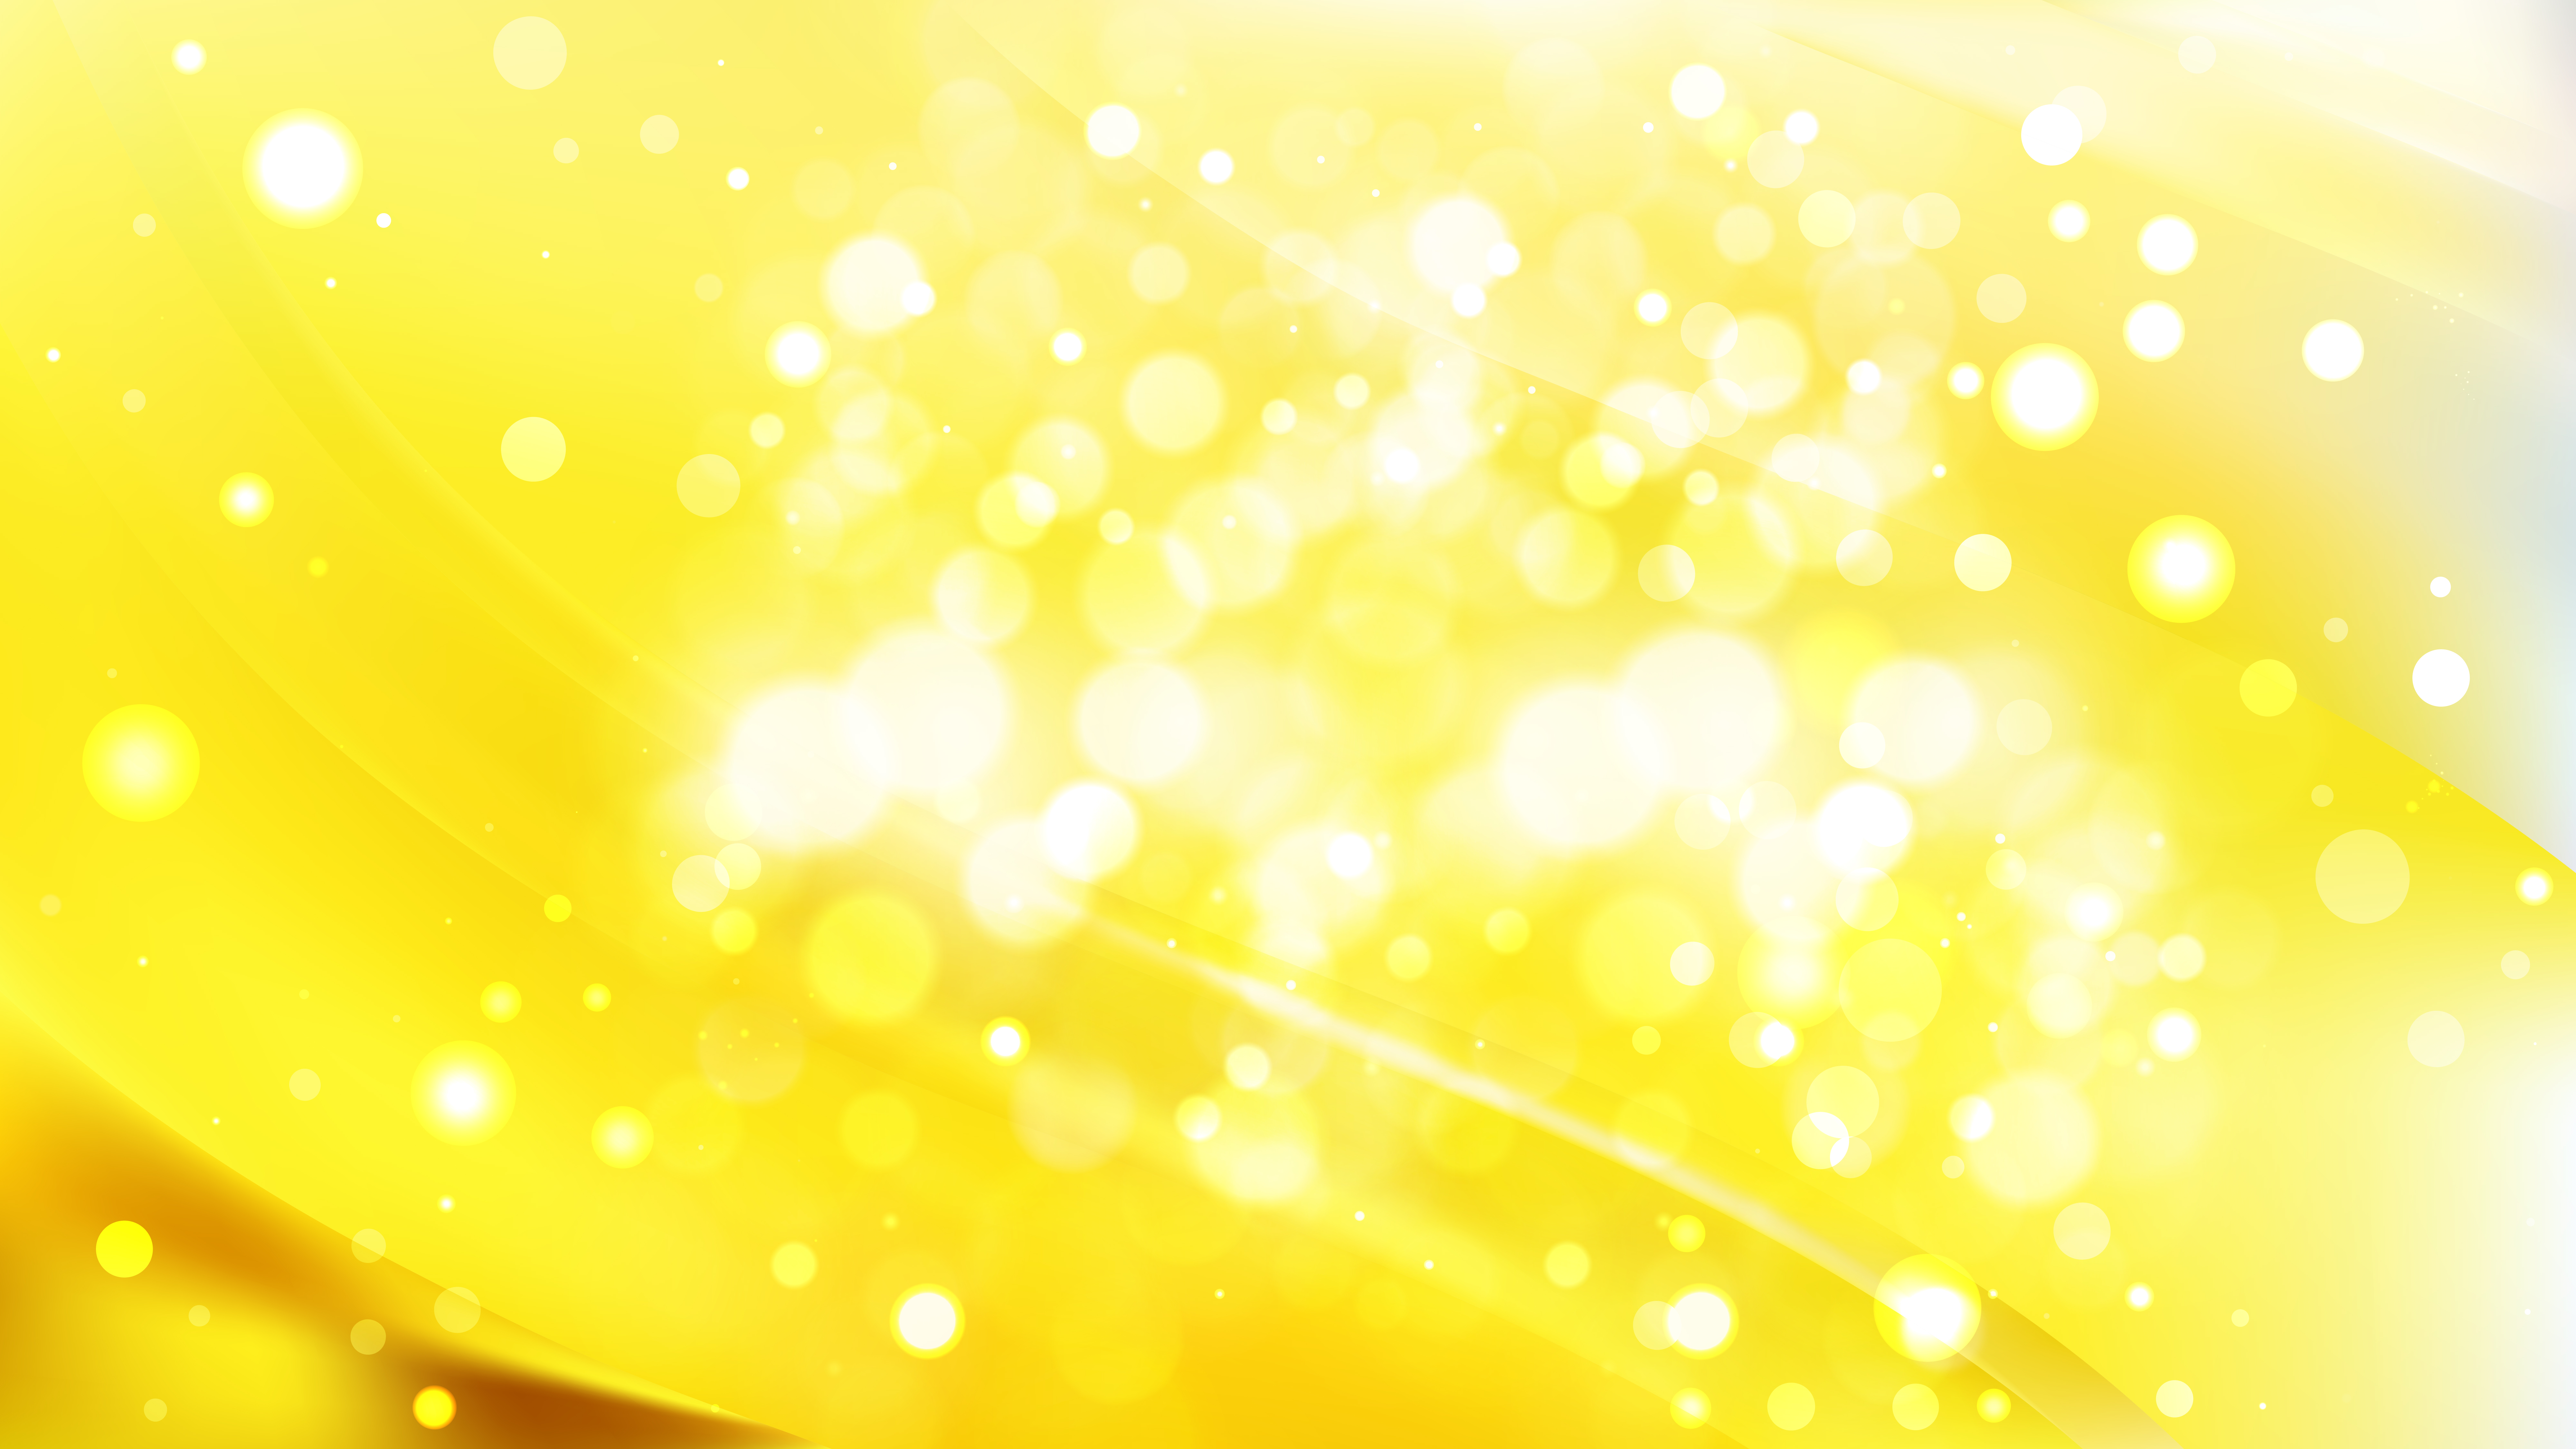 Abstract Bright Yellow Defocused Background Vector